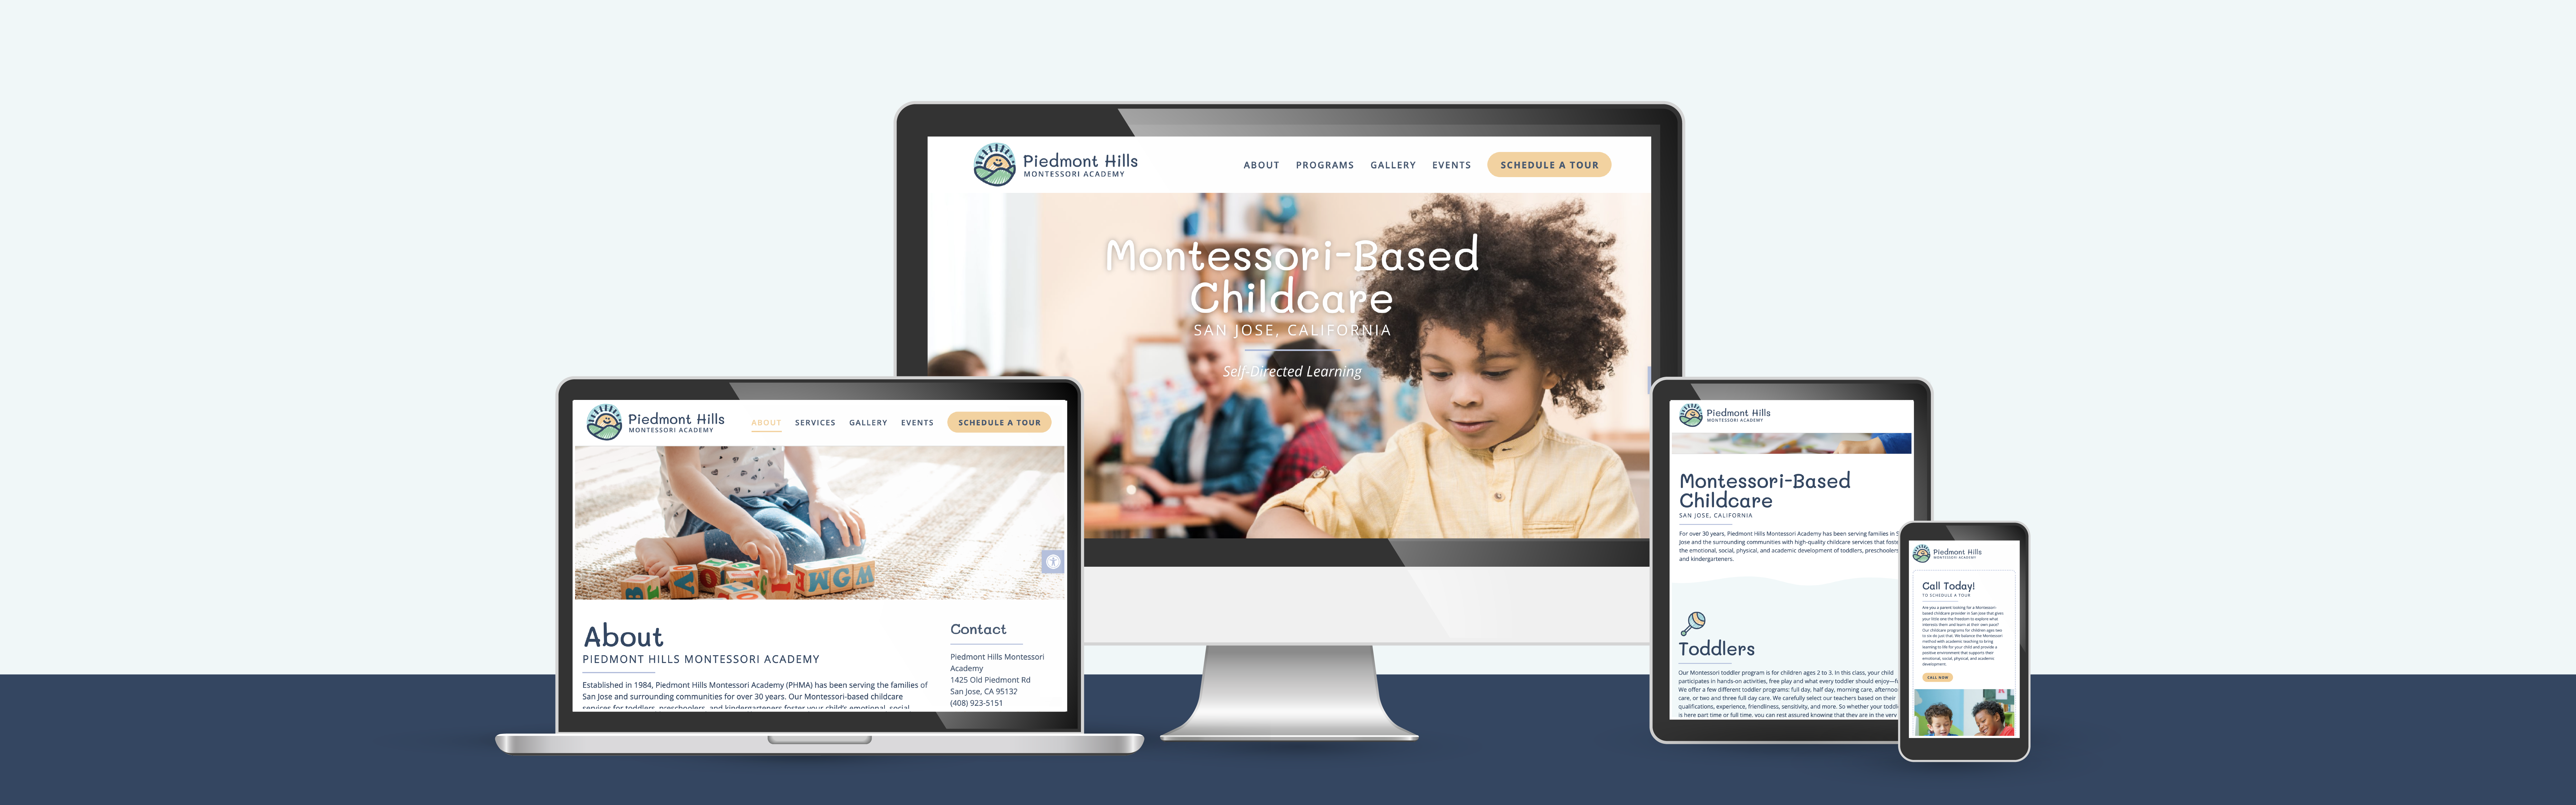 A collection of electronic devices including a desktop computer, a tablet, and a smartphone, all displaying the Piedmont Hills Montessori Academy website with images of children engaged in learning activities.